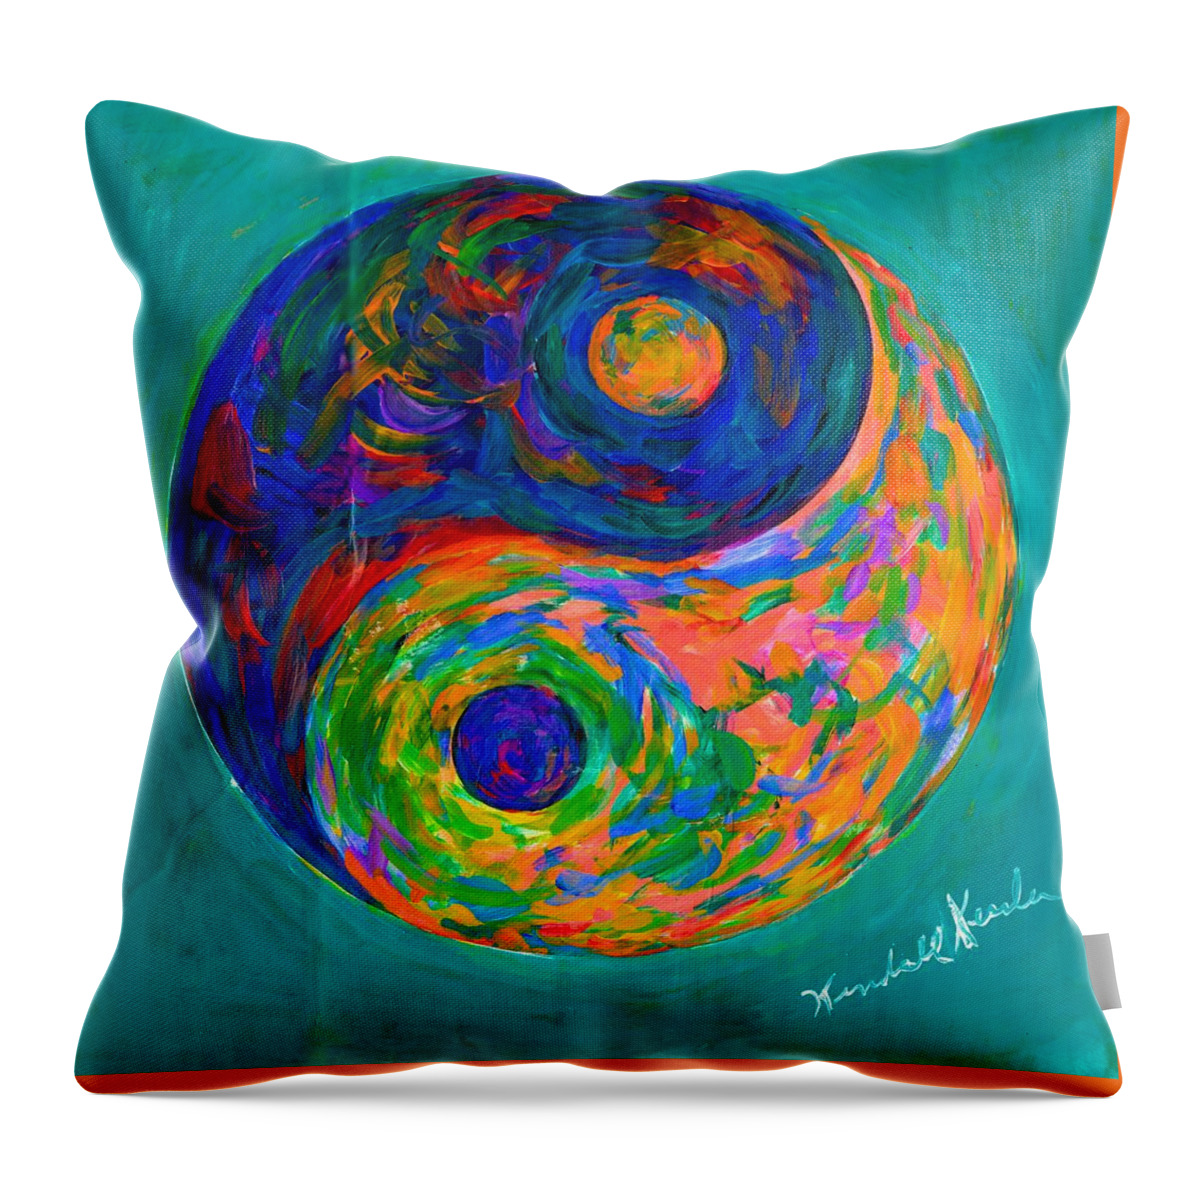 Yin Yang Paintings Throw Pillow featuring the painting Yin Yang Spin by Kendall Kessler